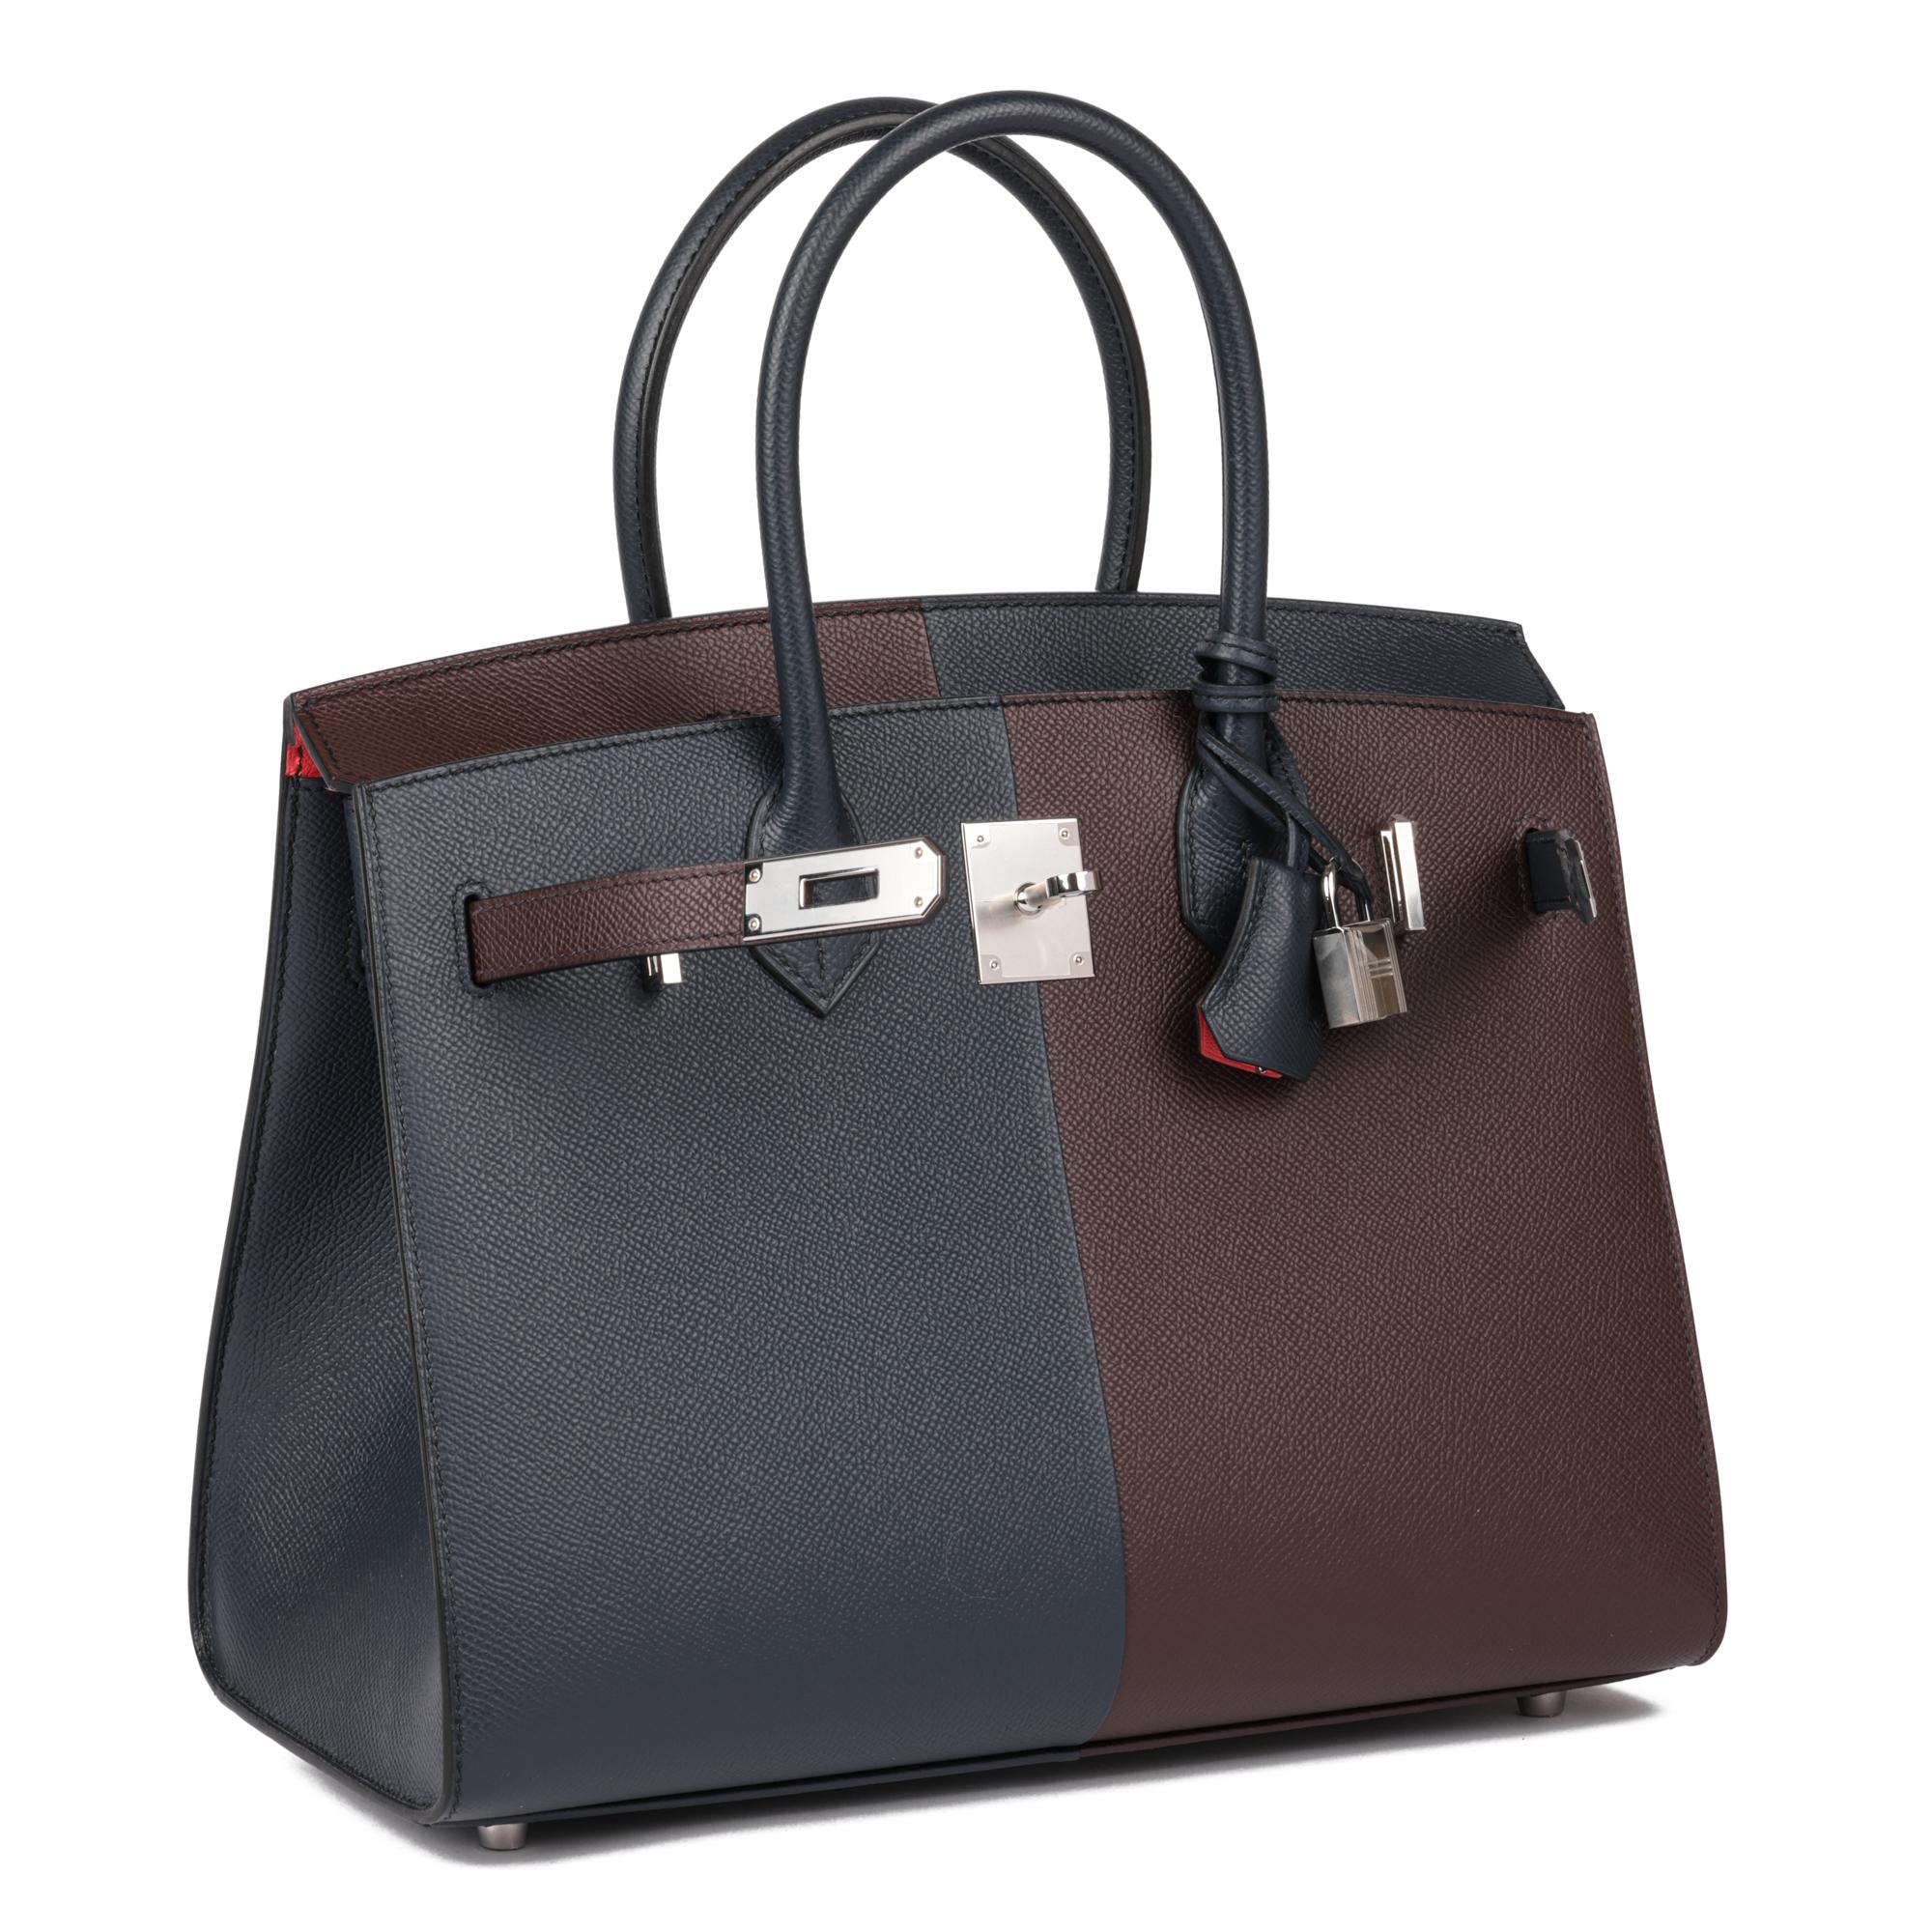 HERMÈS
Blue Indigo, Rouge Sellier & Framboise Epsom Leather Casaque Birkin 30cm Sellier

Xupes Reference: HB5152
Serial Number: U
Age (Circa): 2022
Accompanied By: Hermès Dust Bag, Box, Care Booklet, Rain Cover, Lock, Keys, Clochette, Photograph of